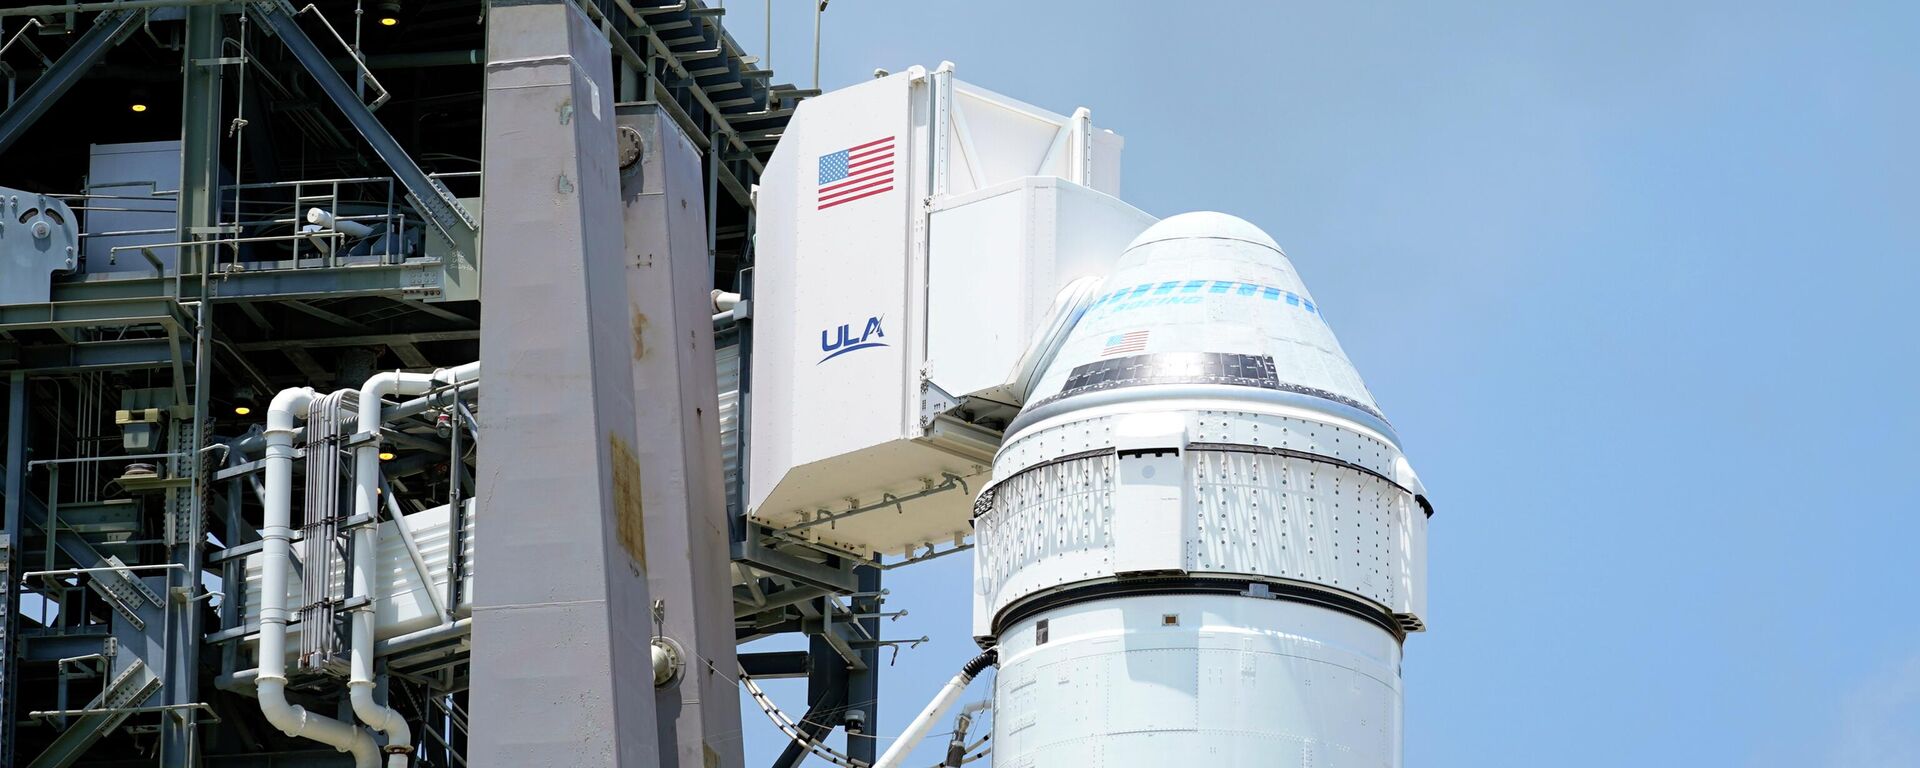 Boeing's CST-100 Starliner spacecraft sits atop a United Launch Alliance Atlas V rocket, on Space Launch Complex 41 at the Cape Canaveral Space Force Station ready for the second un-piloted test flight to the International Space Station, Thursday, July 29, 2021, in Cape Canaveral, Fla. - Sputnik International, 1920, 13.05.2022